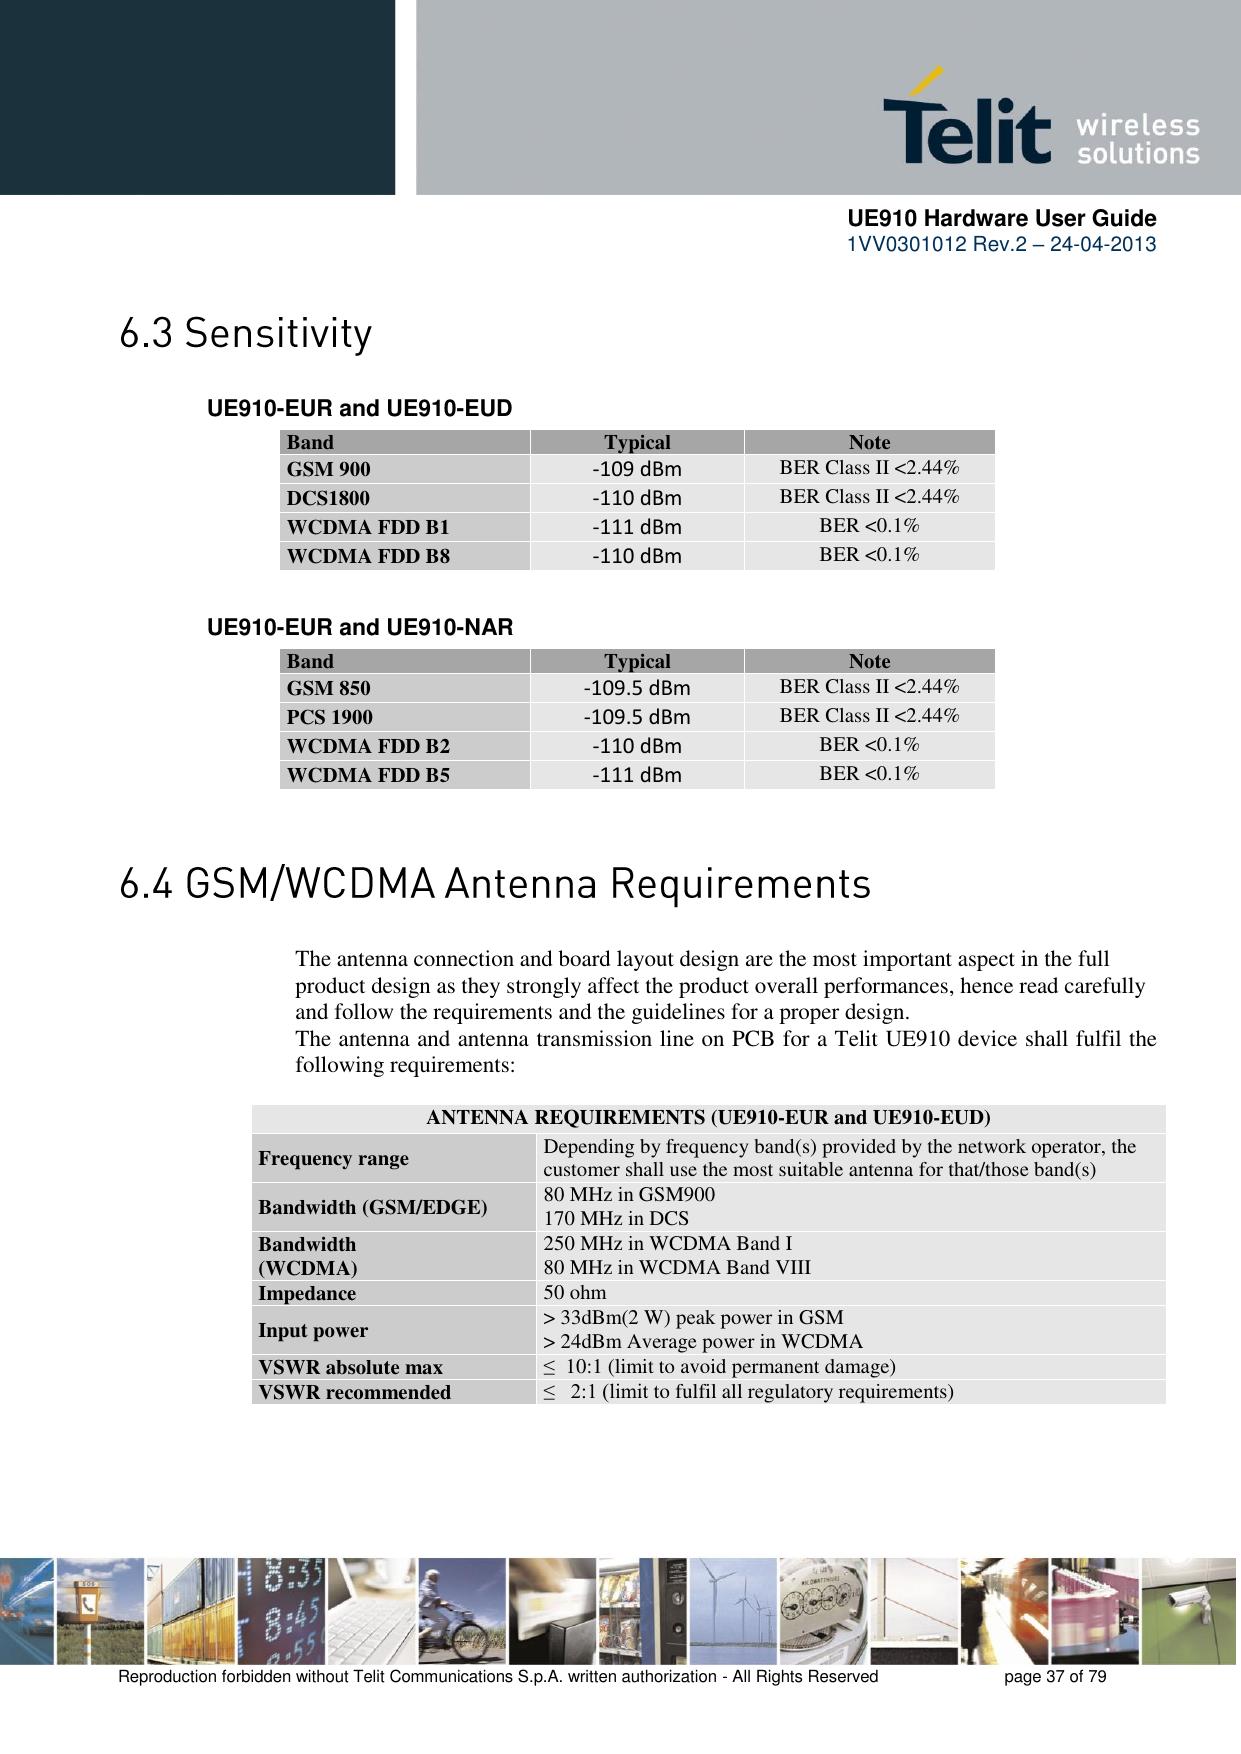      UE910 Hardware User Guide  1VV0301012 Rev.2 – 24-04-2013    Reproduction forbidden without Telit Communications S.p.A. written authorization - All Rights Reserved    page 37 of 79   UE910-EUR and UE910-EUD        UE910-EUR and UE910-NAR      The antenna connection and board layout design are the most important aspect in the full product design as they strongly affect the product overall performances, hence read carefully and follow the requirements and the guidelines for a proper design. The antenna and antenna transmission line on PCB for a Telit UE910 device shall fulfil the following requirements:   ANTENNA REQUIREMENTS (UE910-EUR and UE910-EUD) Frequency range Depending by frequency band(s) provided by the network operator, the customer shall use the most suitable antenna for that/those band(s) Bandwidth (GSM/EDGE) 80 MHz in GSM900 170 MHz in DCS Bandwidth  (WCDMA) 250 MHz in WCDMA Band I 80 MHz in WCDMA Band VIII Impedance 50 ohm Input power &gt; 33dBm(2 W) peak power in GSM &gt; 24dBm Average power in WCDMA VSWR absolute max ≤  10:1 (limit to avoid permanent damage) VSWR recommended ≤   2:1 (limit to fulfil all regulatory requirements)     Band Typical  Note GSM 900 -109 dBm BER Class II &lt;2.44% DCS1800 -110 dBm BER Class II &lt;2.44% WCDMA FDD B1 -111 dBm BER &lt;0.1% WCDMA FDD B8 -110 dBm BER &lt;0.1% Band Typical  Note GSM 850 -109.5 dBm BER Class II &lt;2.44% PCS 1900 -109.5 dBm BER Class II &lt;2.44% WCDMA FDD B2 -110 dBm BER &lt;0.1% WCDMA FDD B5 -111 dBm BER &lt;0.1% 